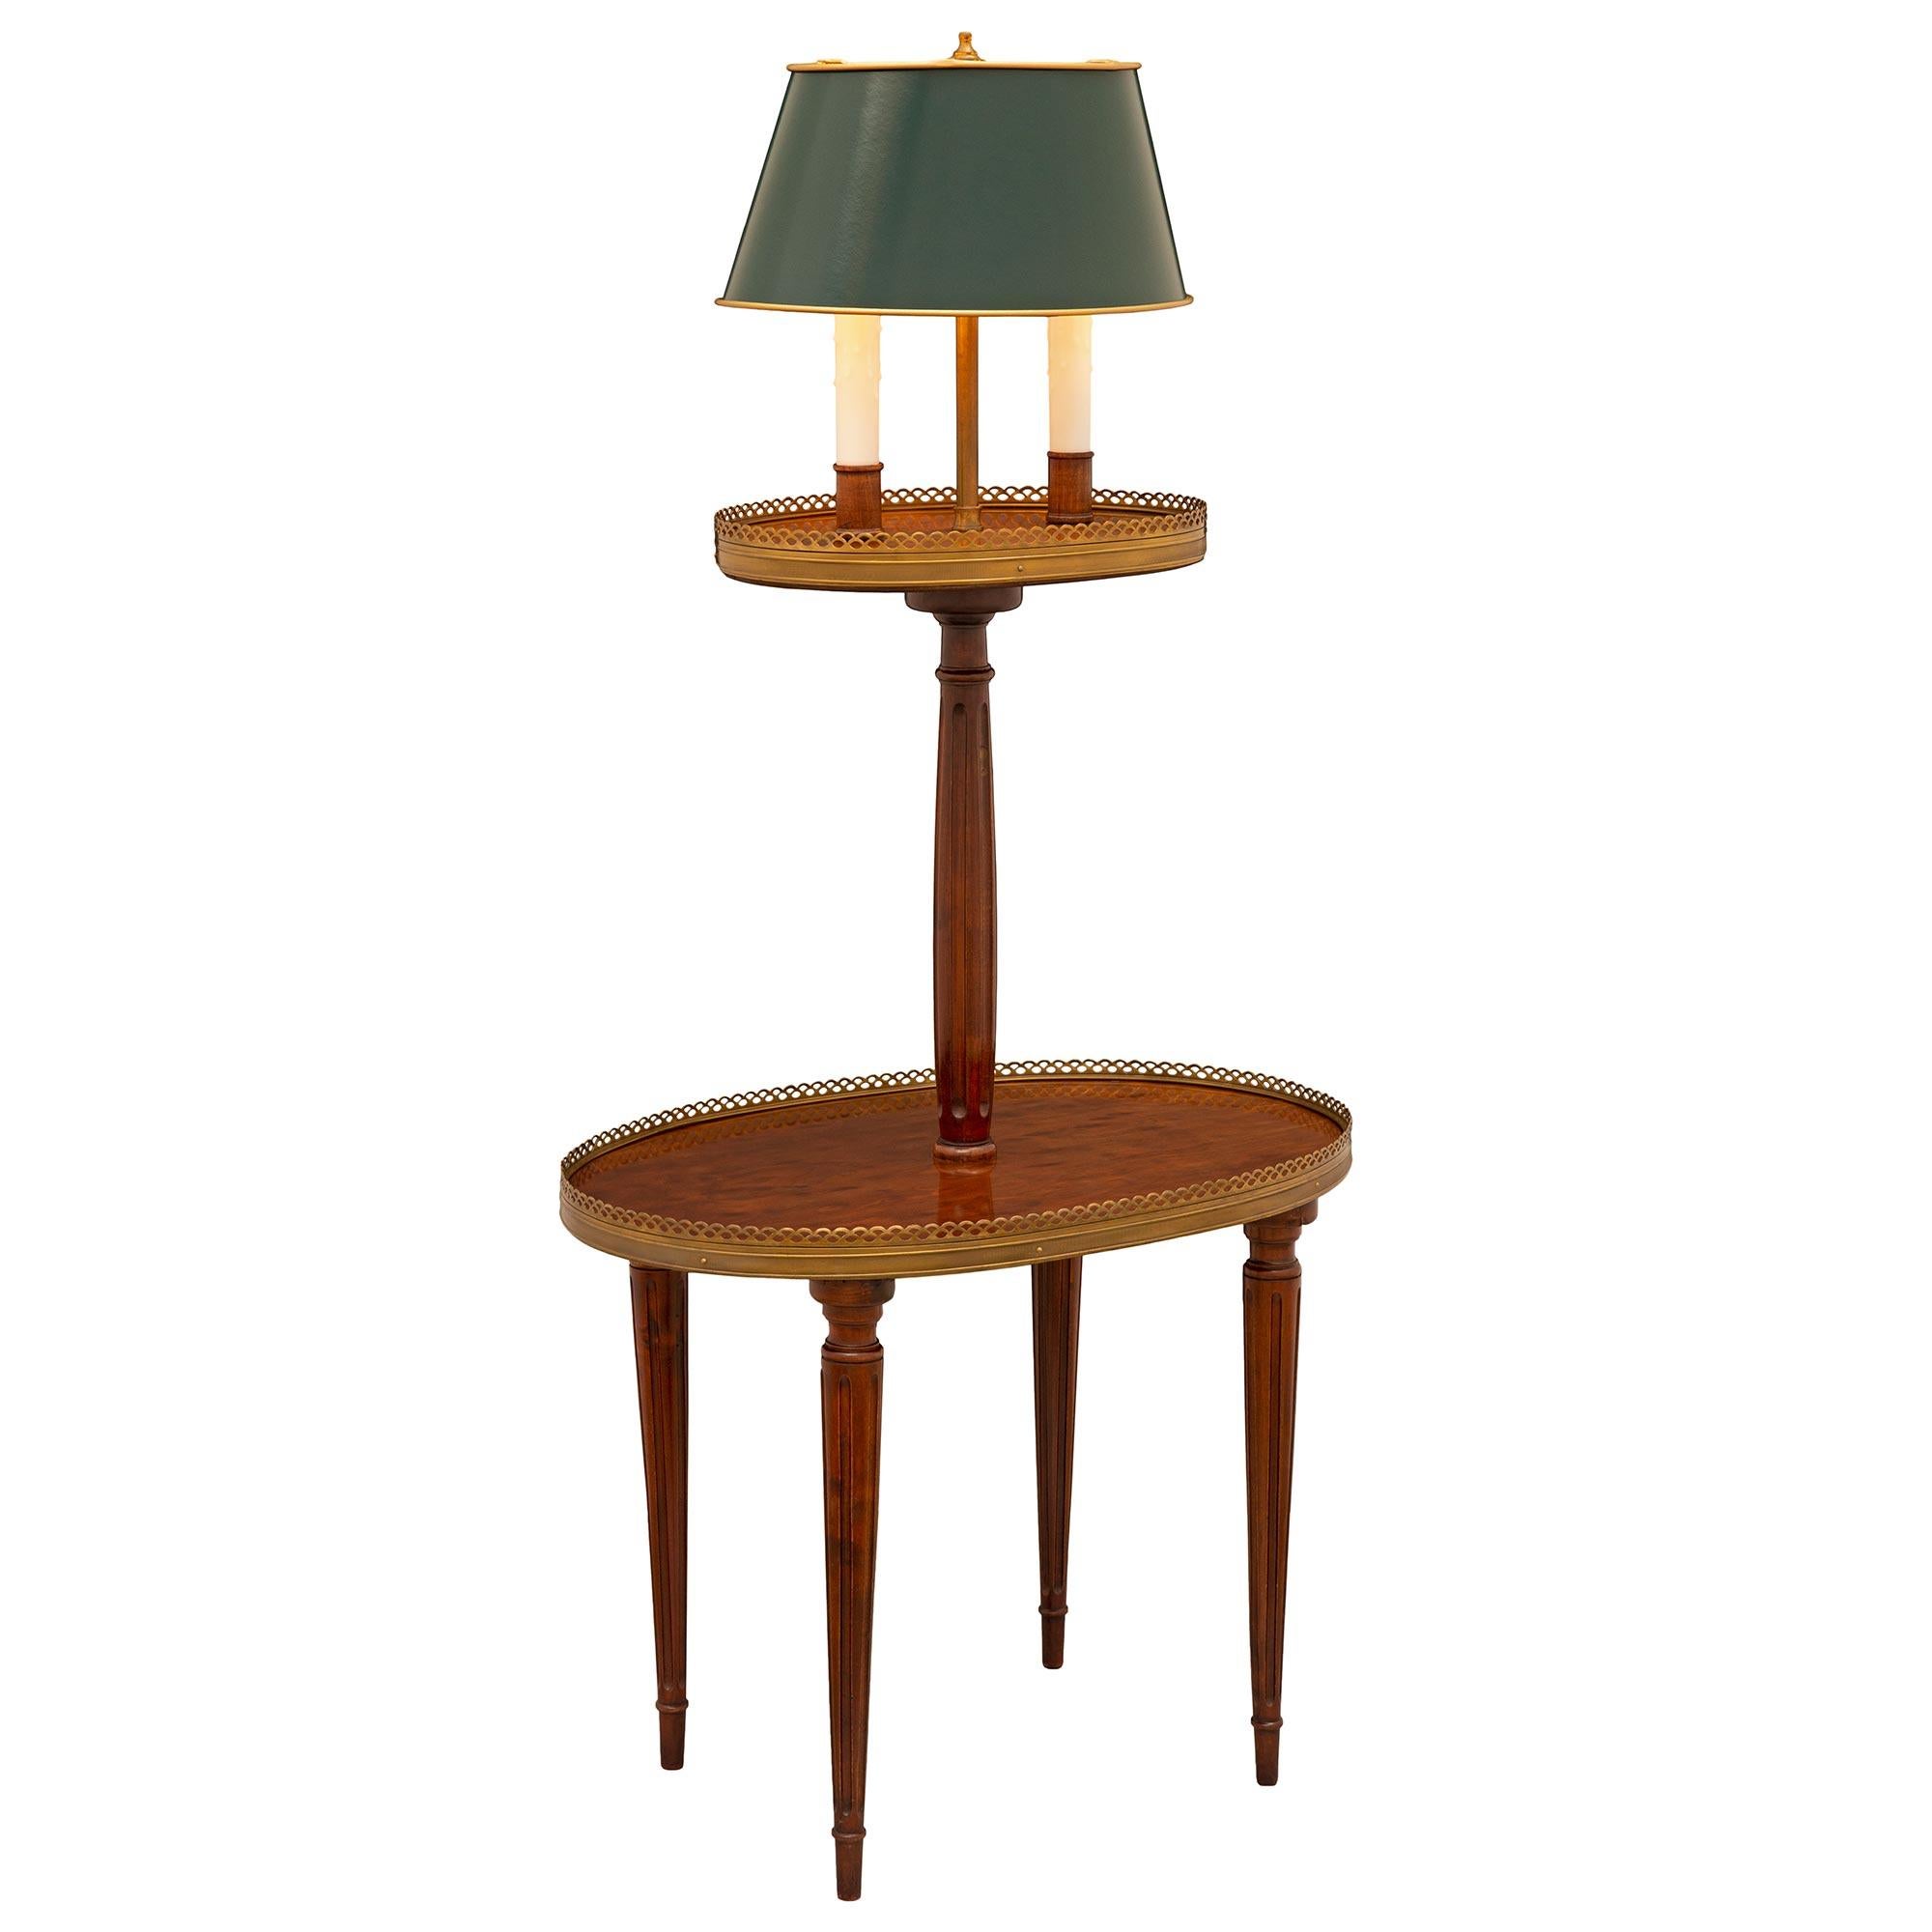 A charming French 19th century Louis XVI st. Mahogany, ormolu, and tole side table. The two tier table and lamp are raised by most elegant circular tapered fluted legs with fine mottled top caps. The bottom tier displays a lovely French polished top